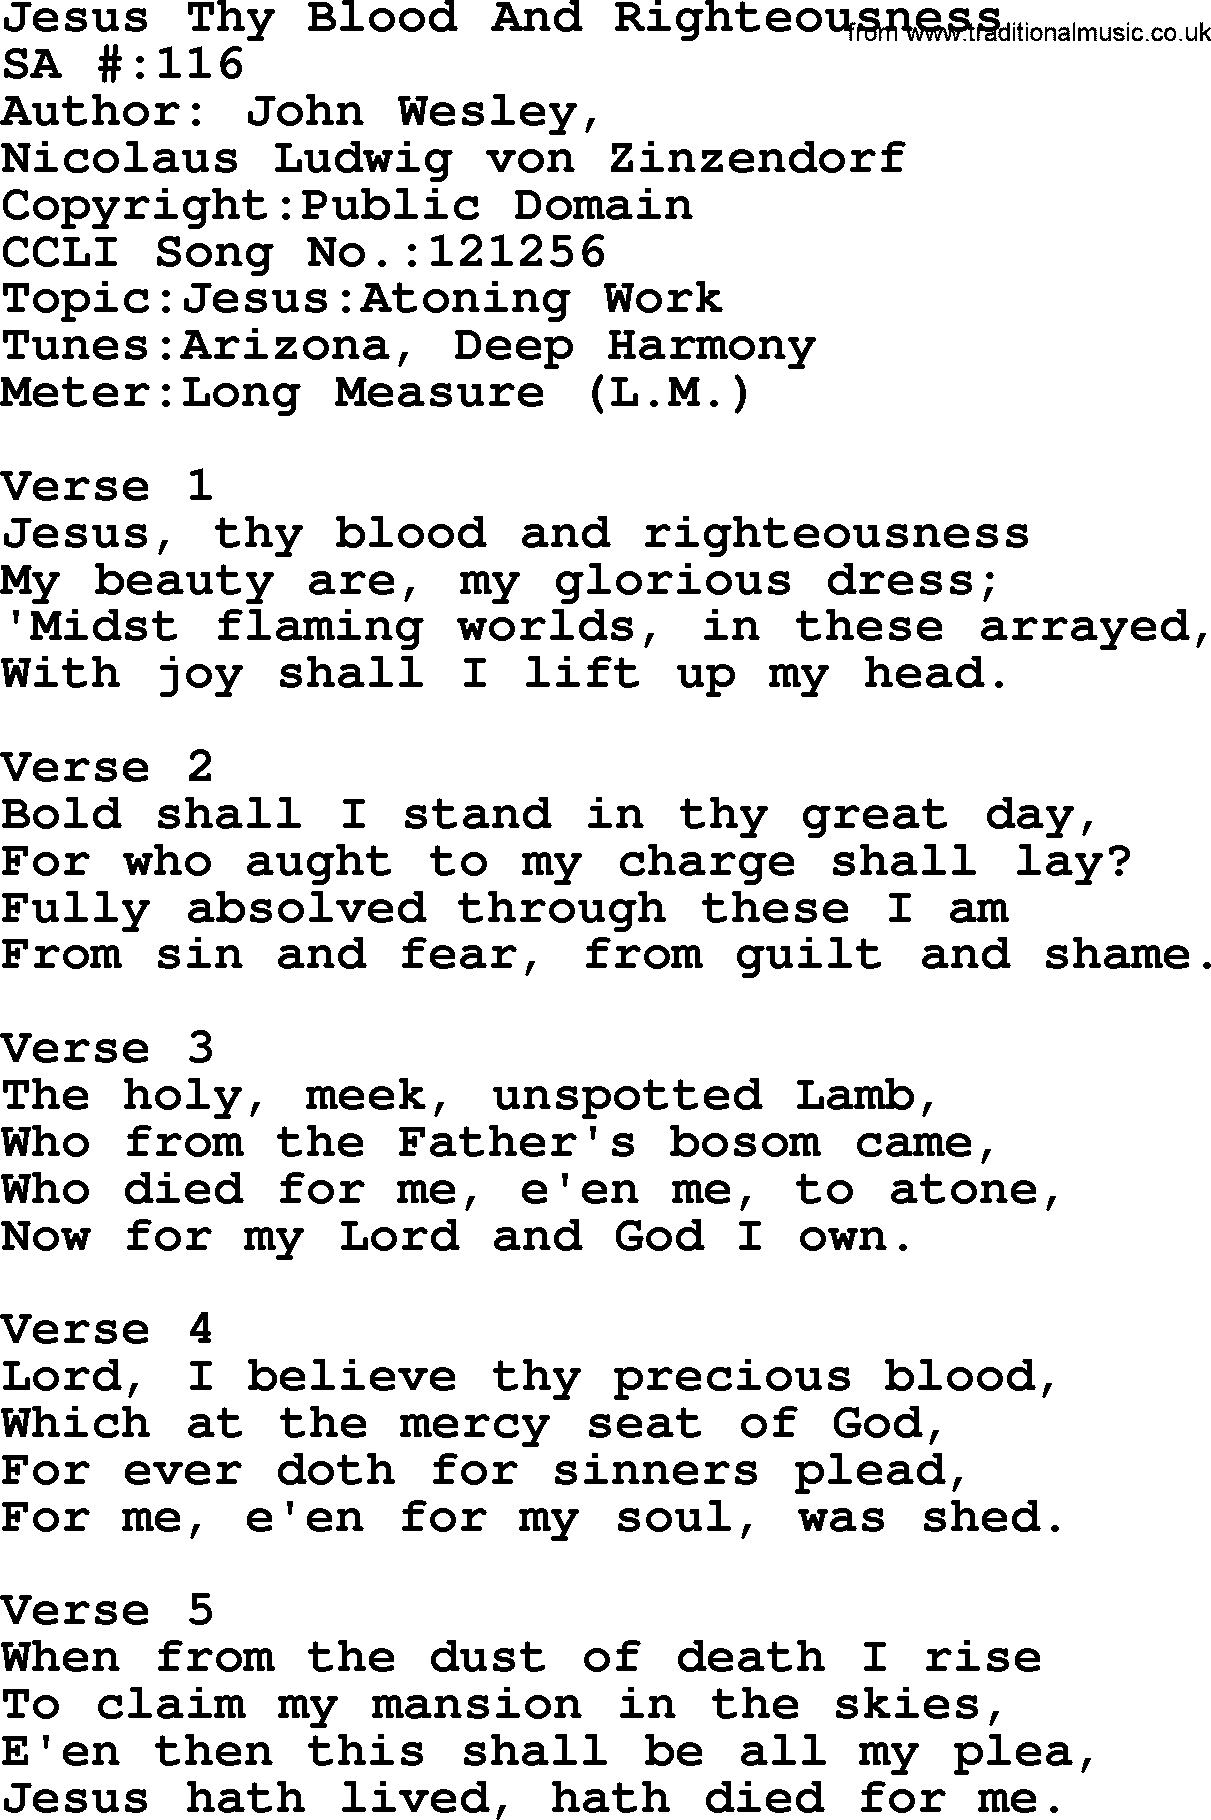 Salvation Army Hymnal, title: Jesus Thy Blood And Righteousness, with lyrics and PDF,